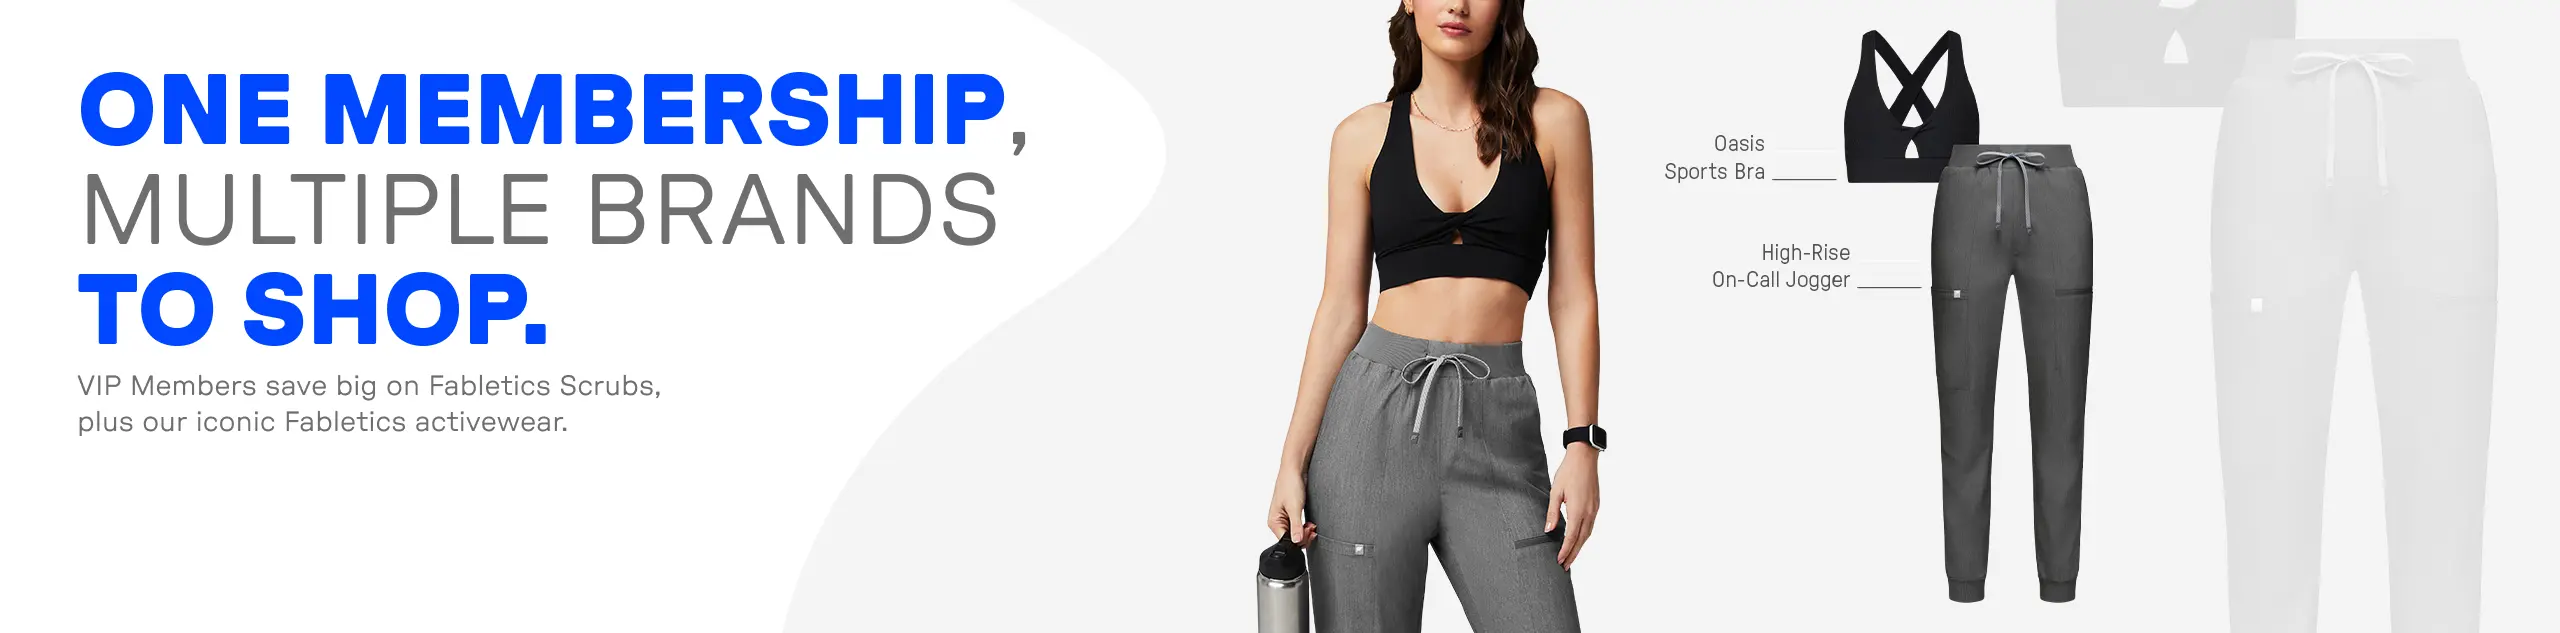 One membership, multiple brands to shop. VIP members save big on Fabletics Scrubs plus our iconic Fabletics activewear.